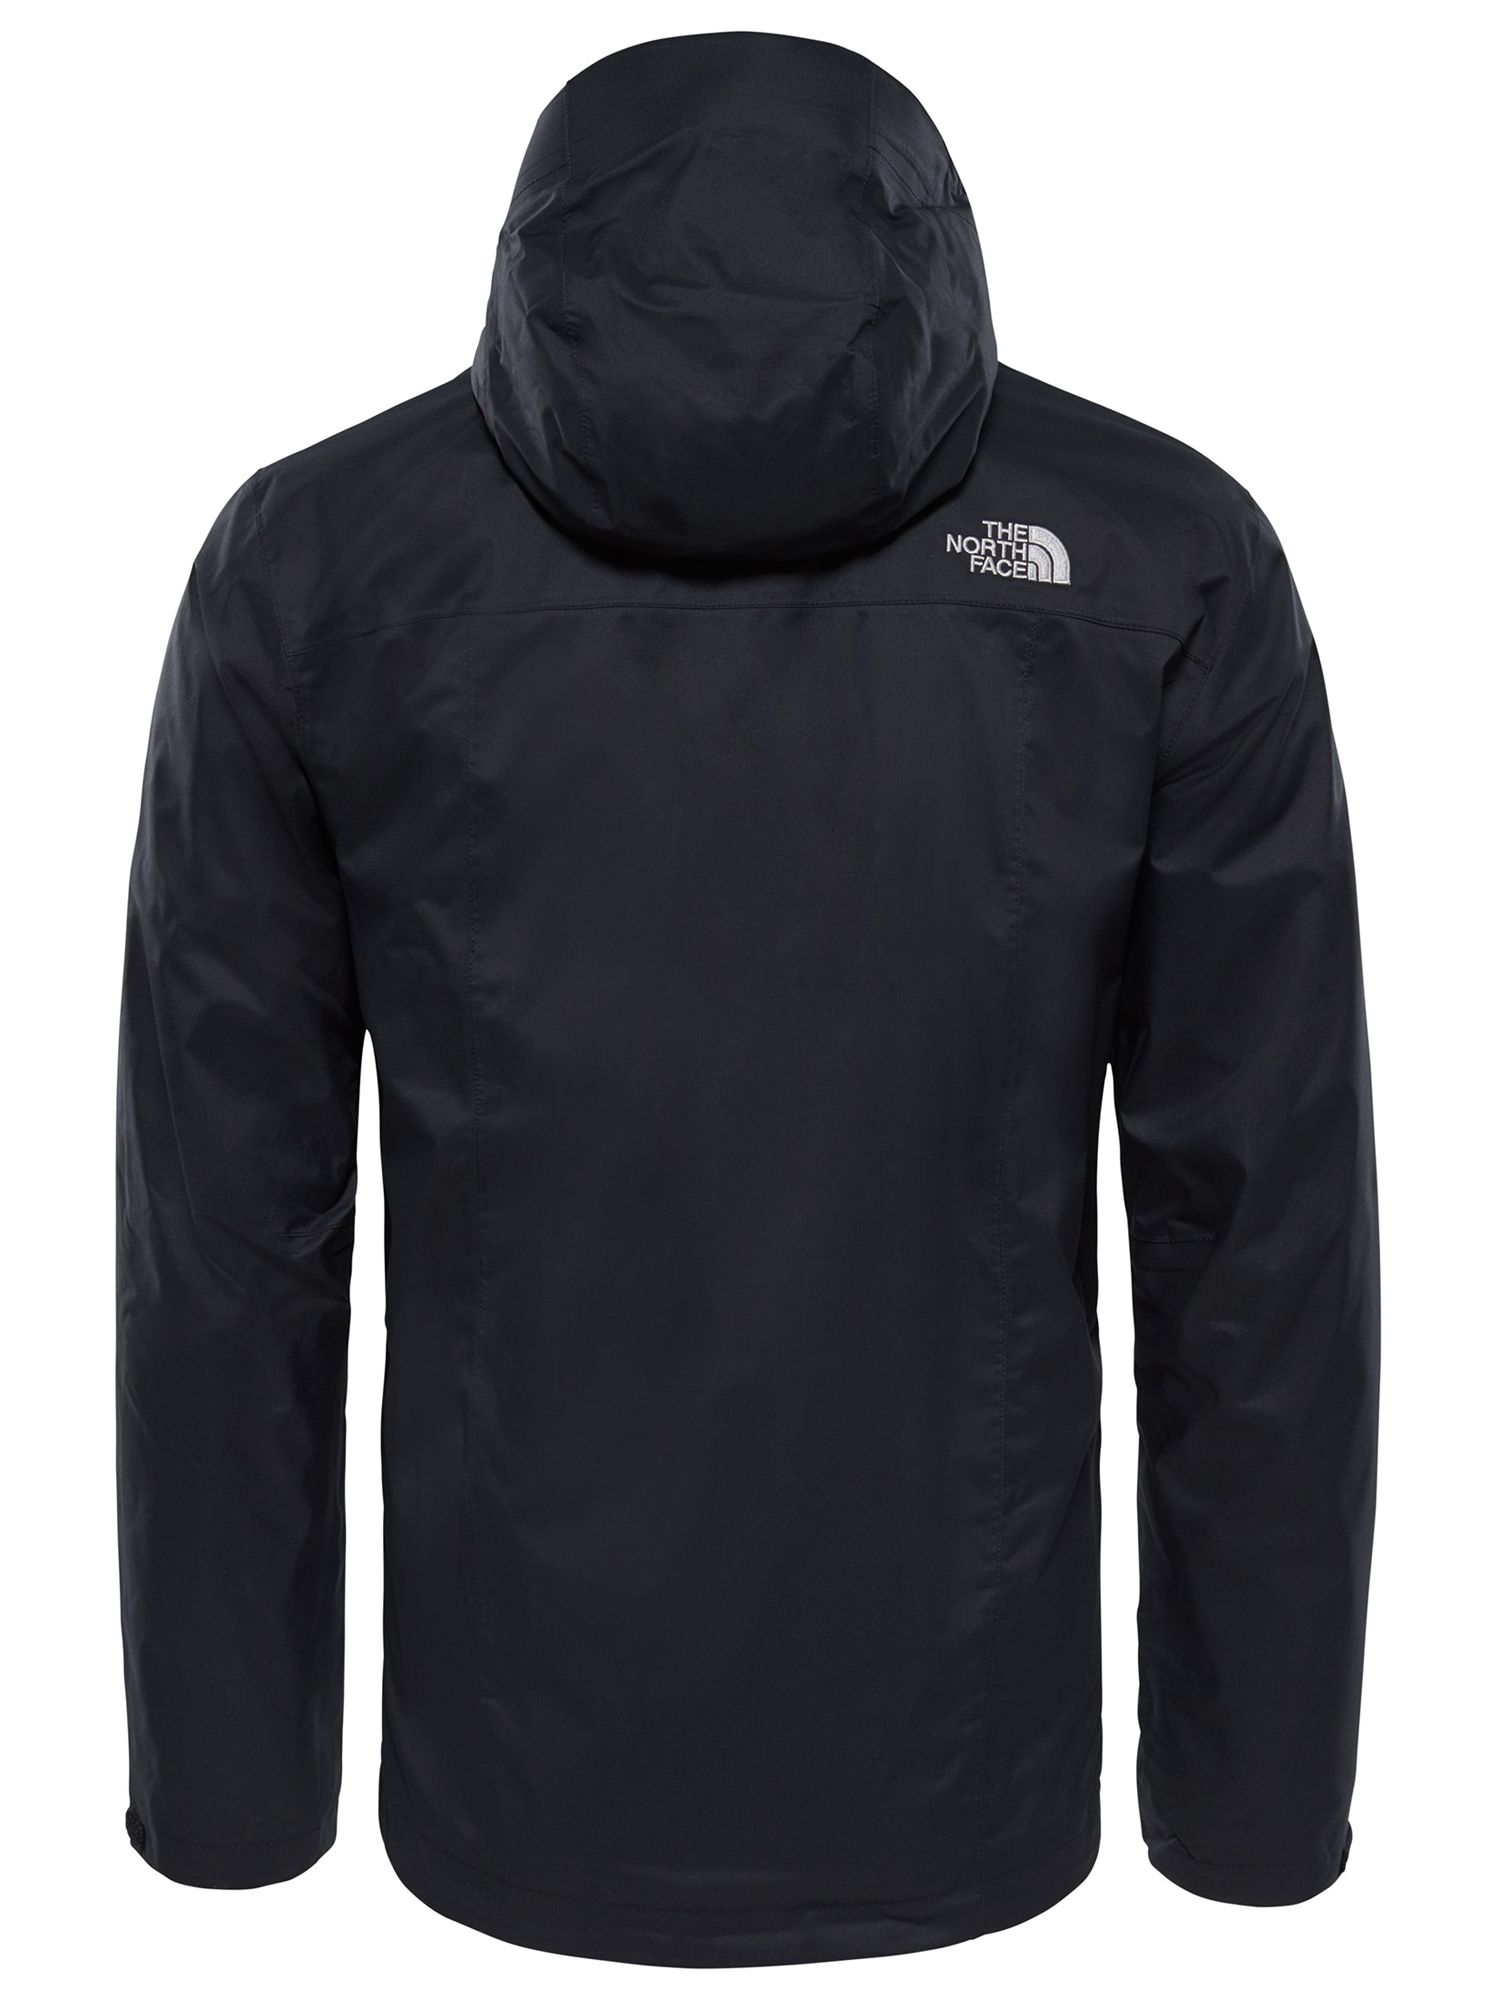 The North Face Evolve II Triclimate 3-in-1 Waterproof Men's Jacket, Black at John Lewis & Partners